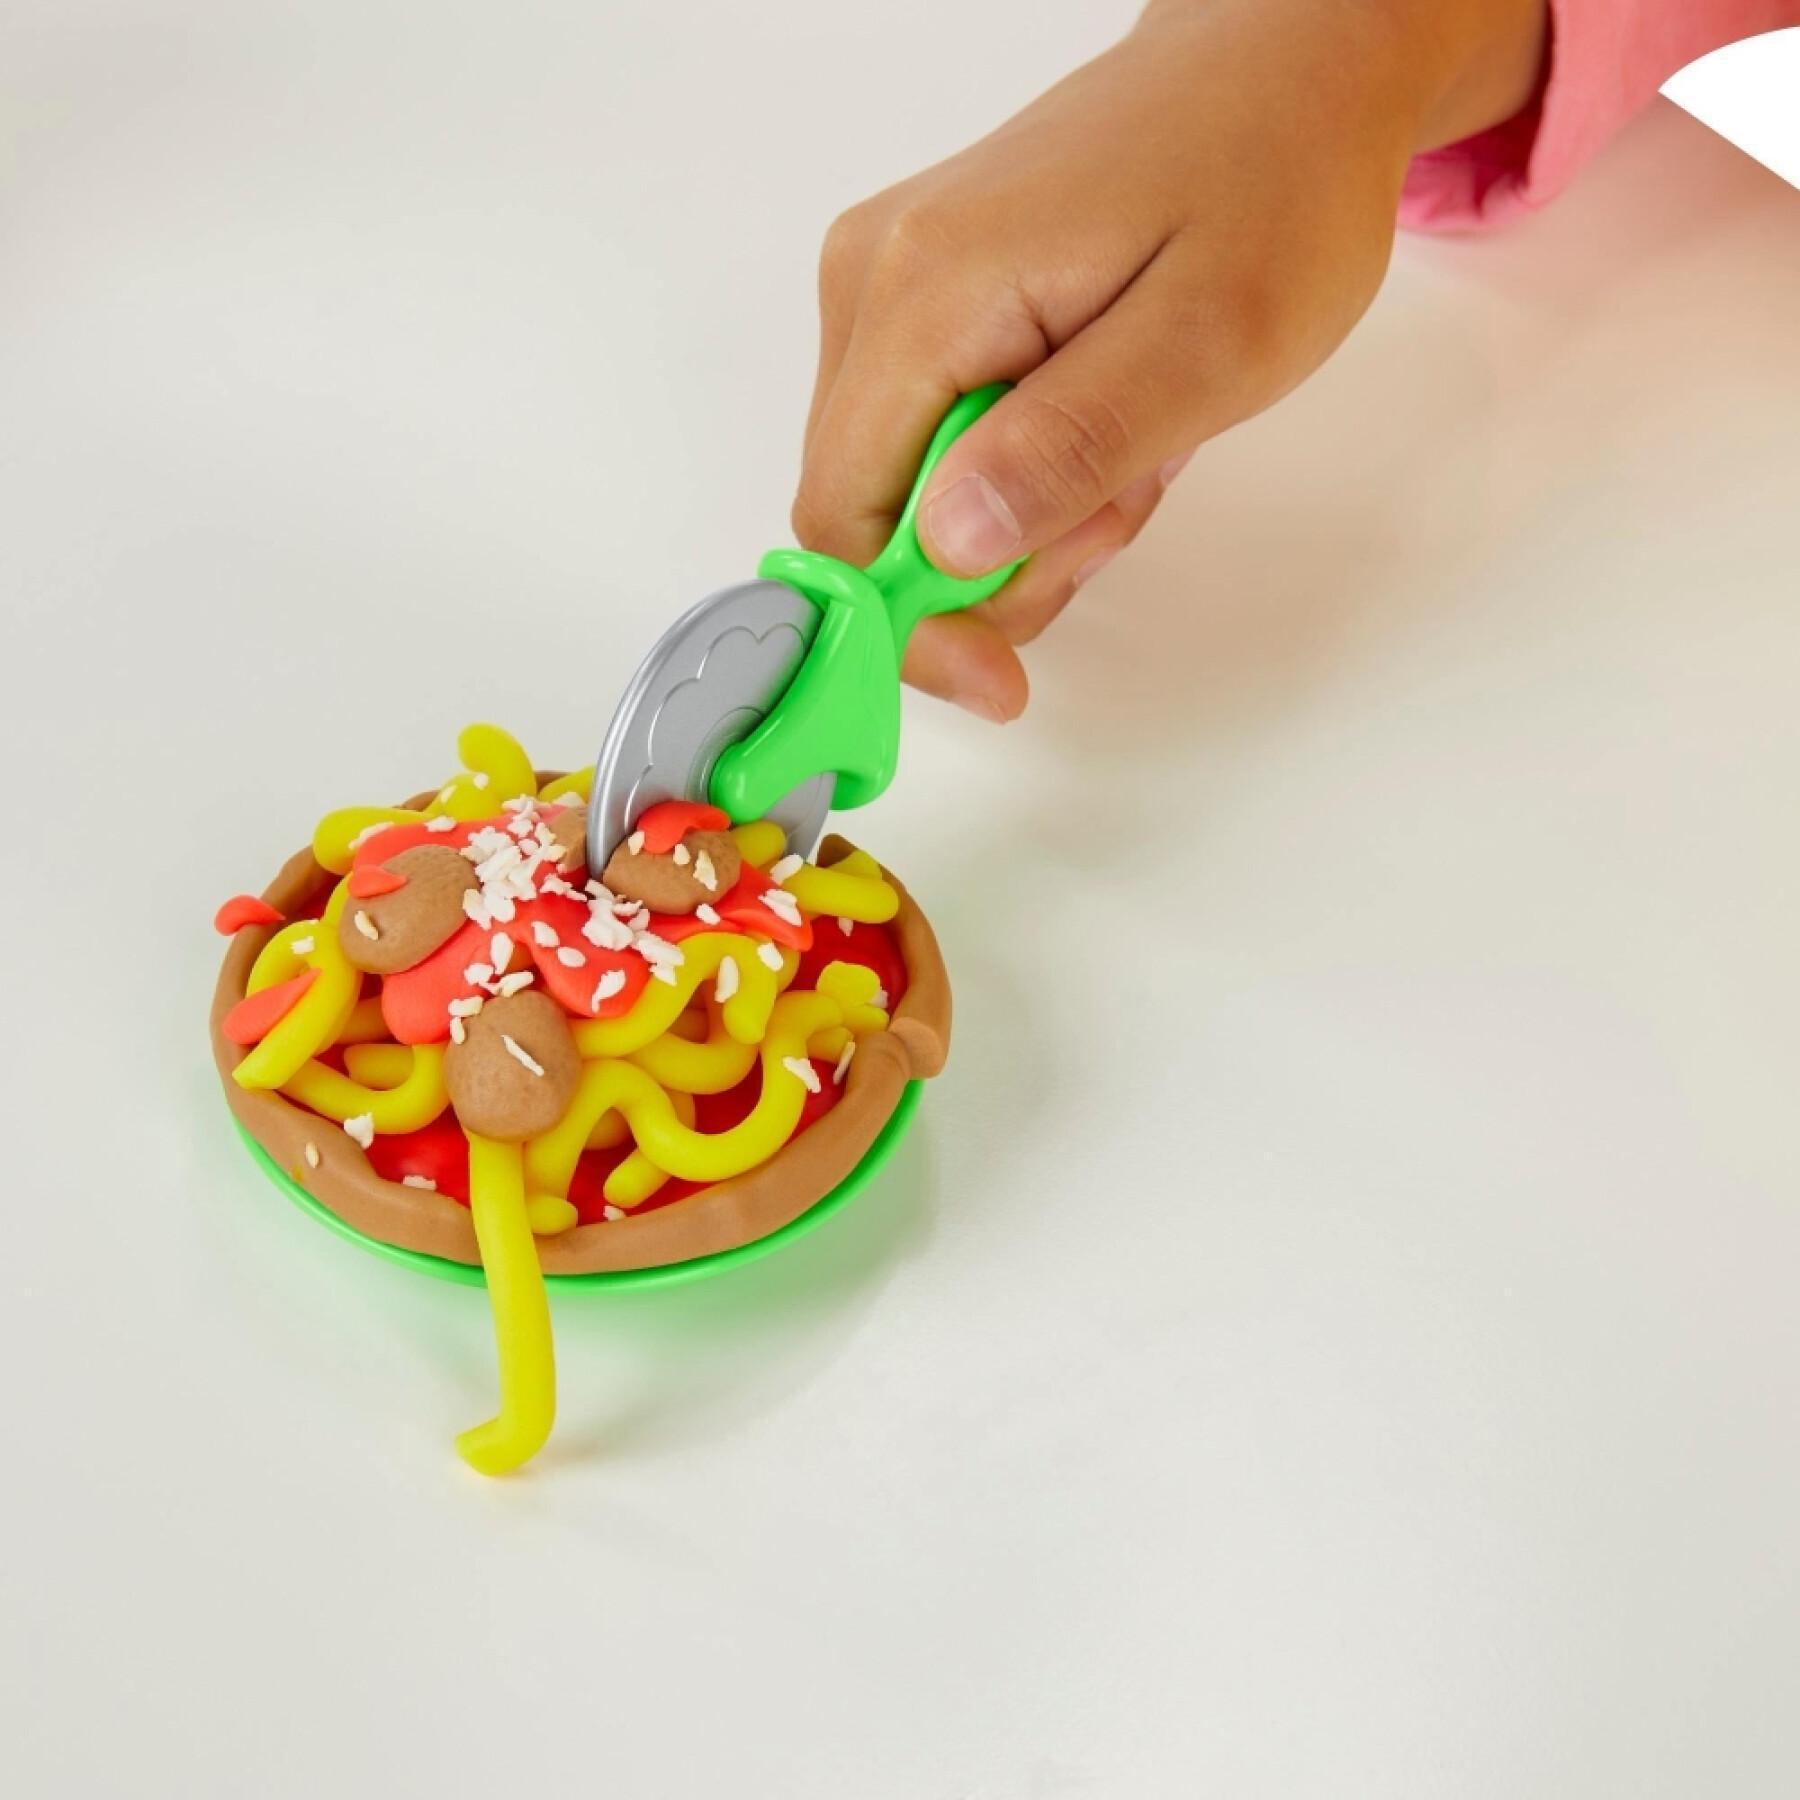 Modelling dough for pizza oven Play Doh